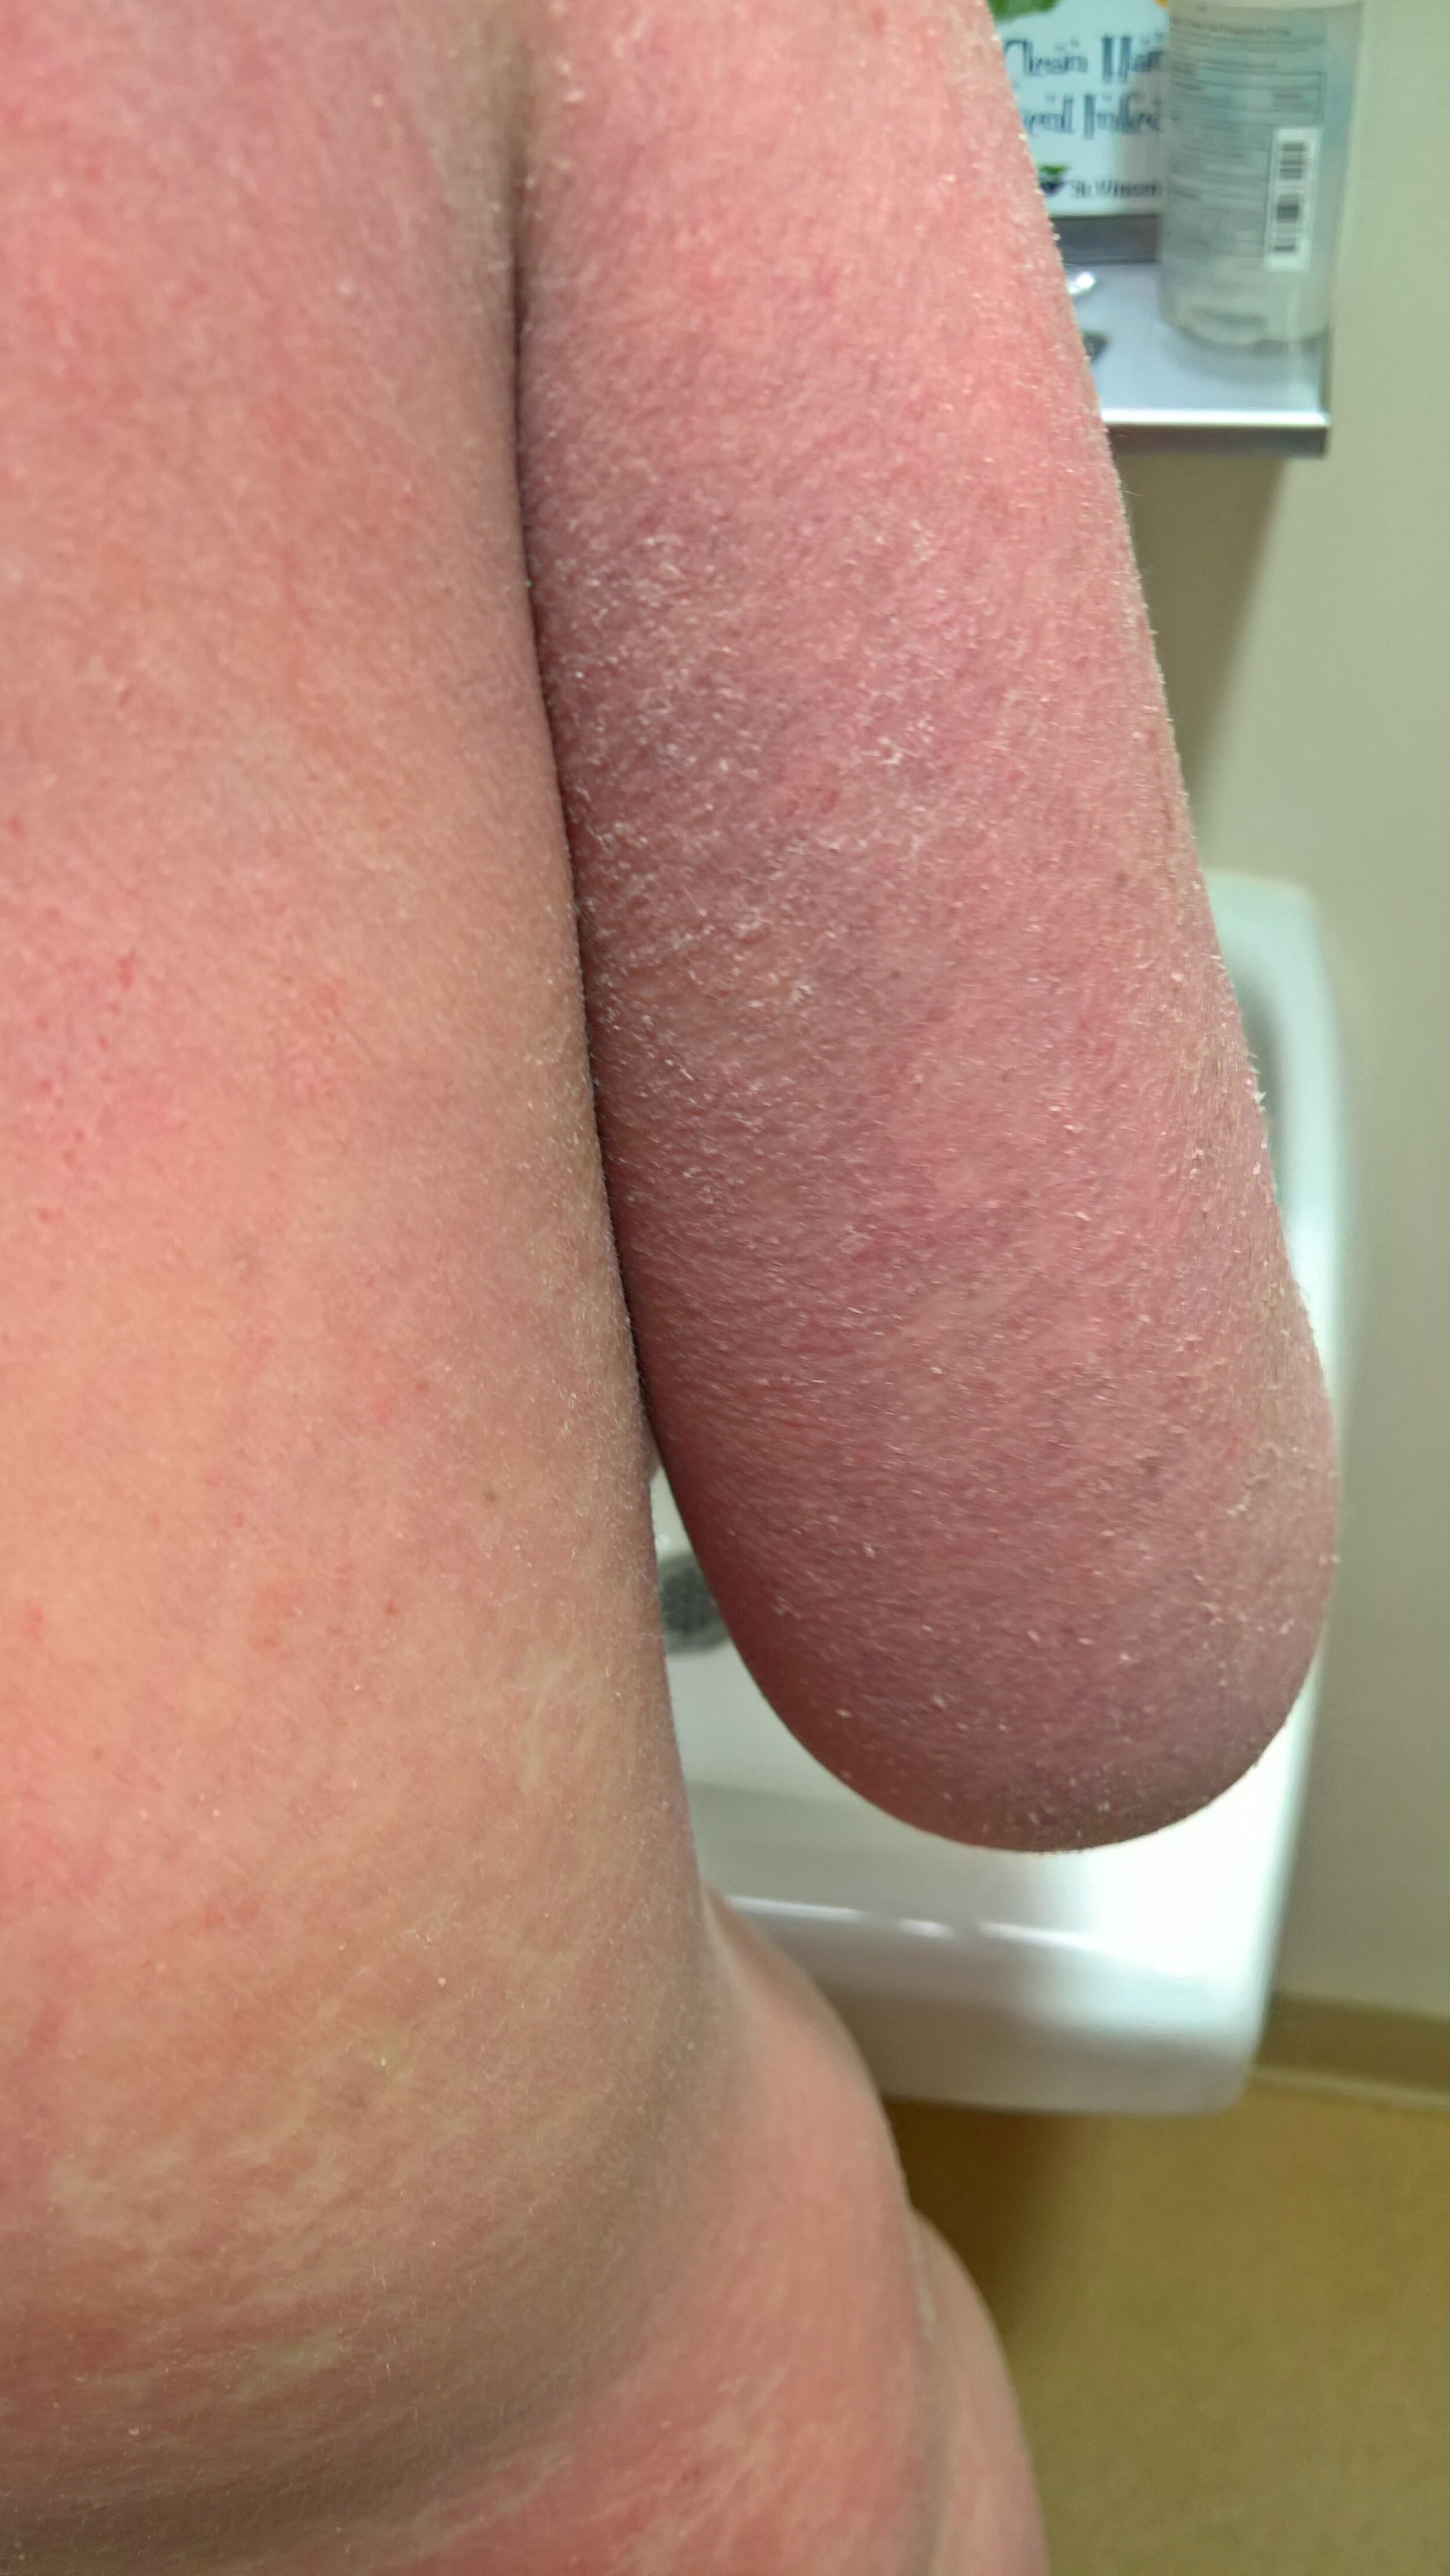 Jessica Morrison - Back of Right Arm and Side Emergency Room - Topical Steroid Withdrawal.jpg